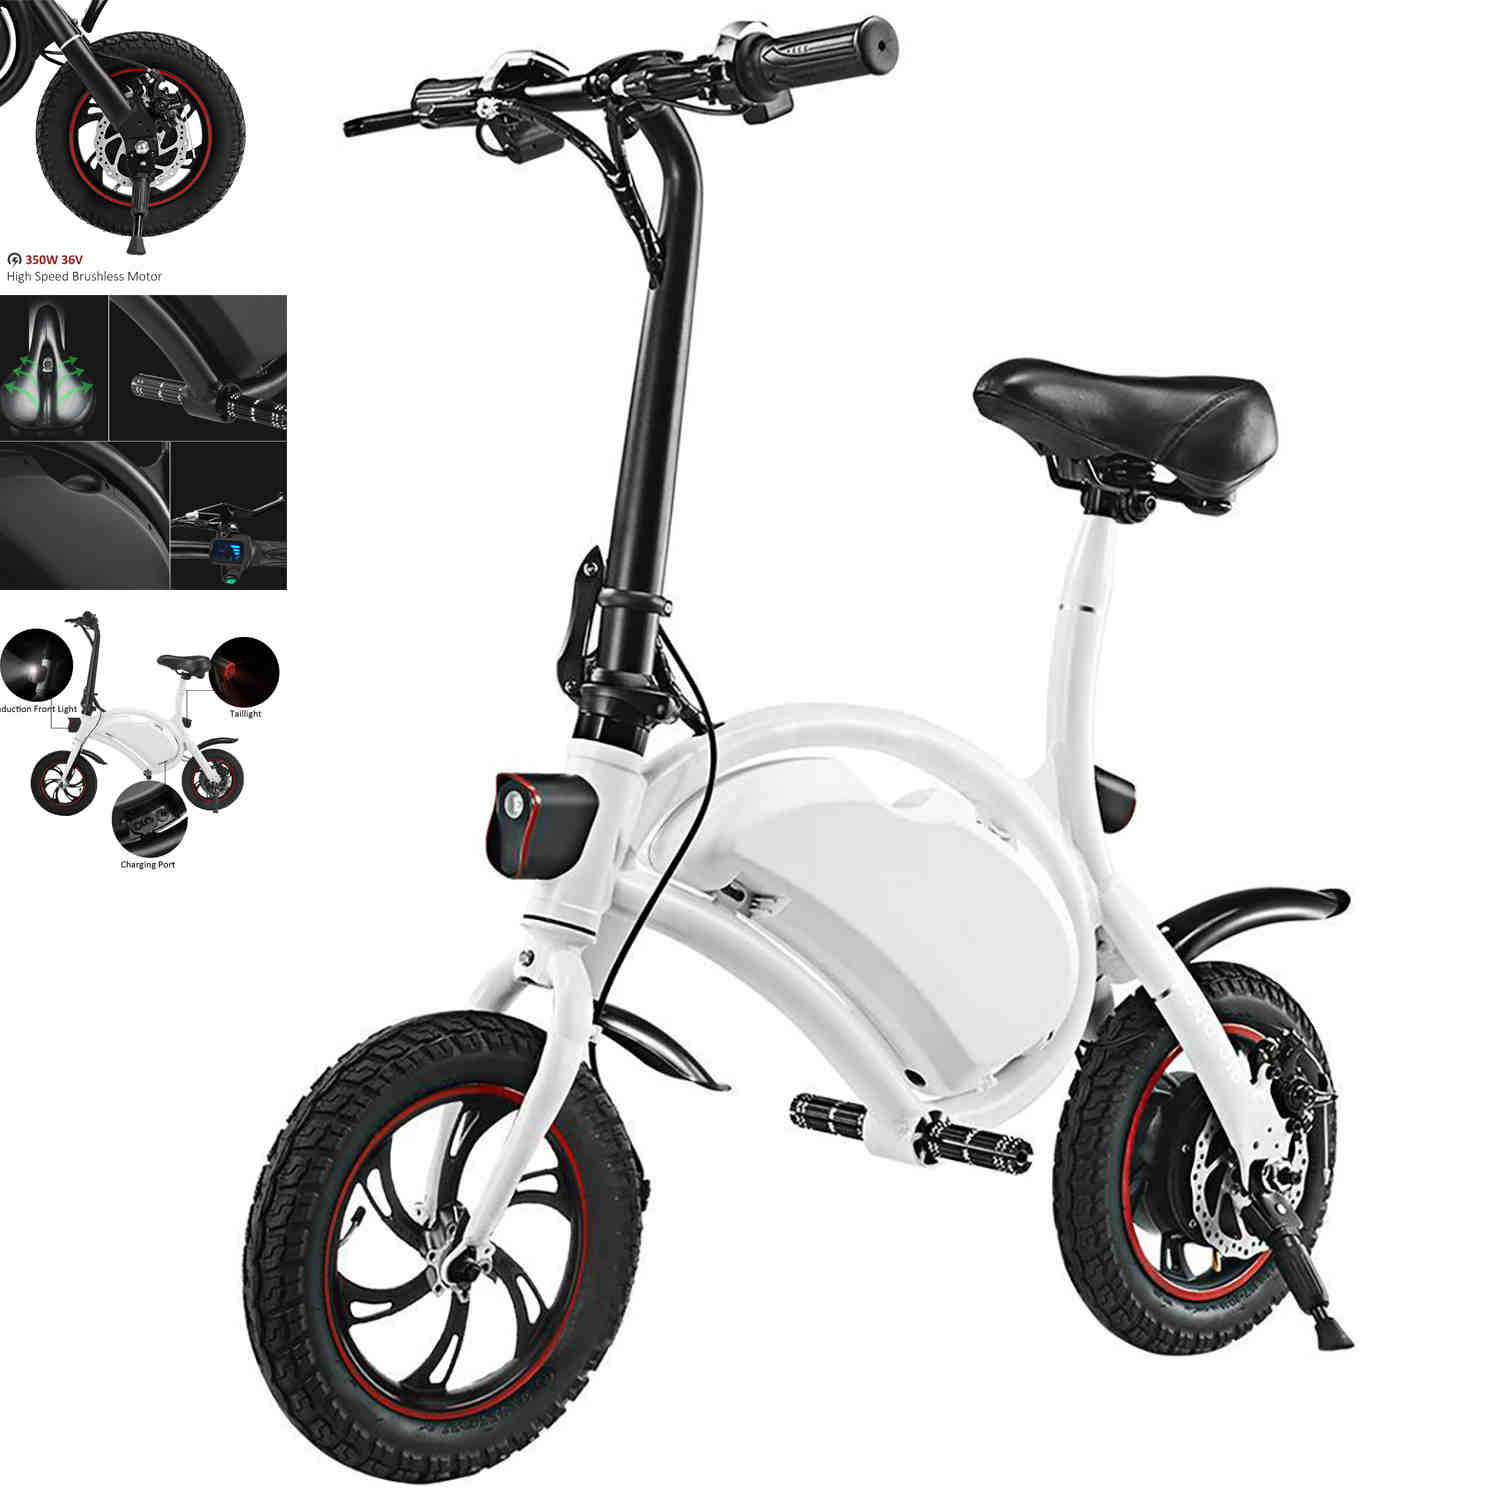 What is the cheapest electric moped?